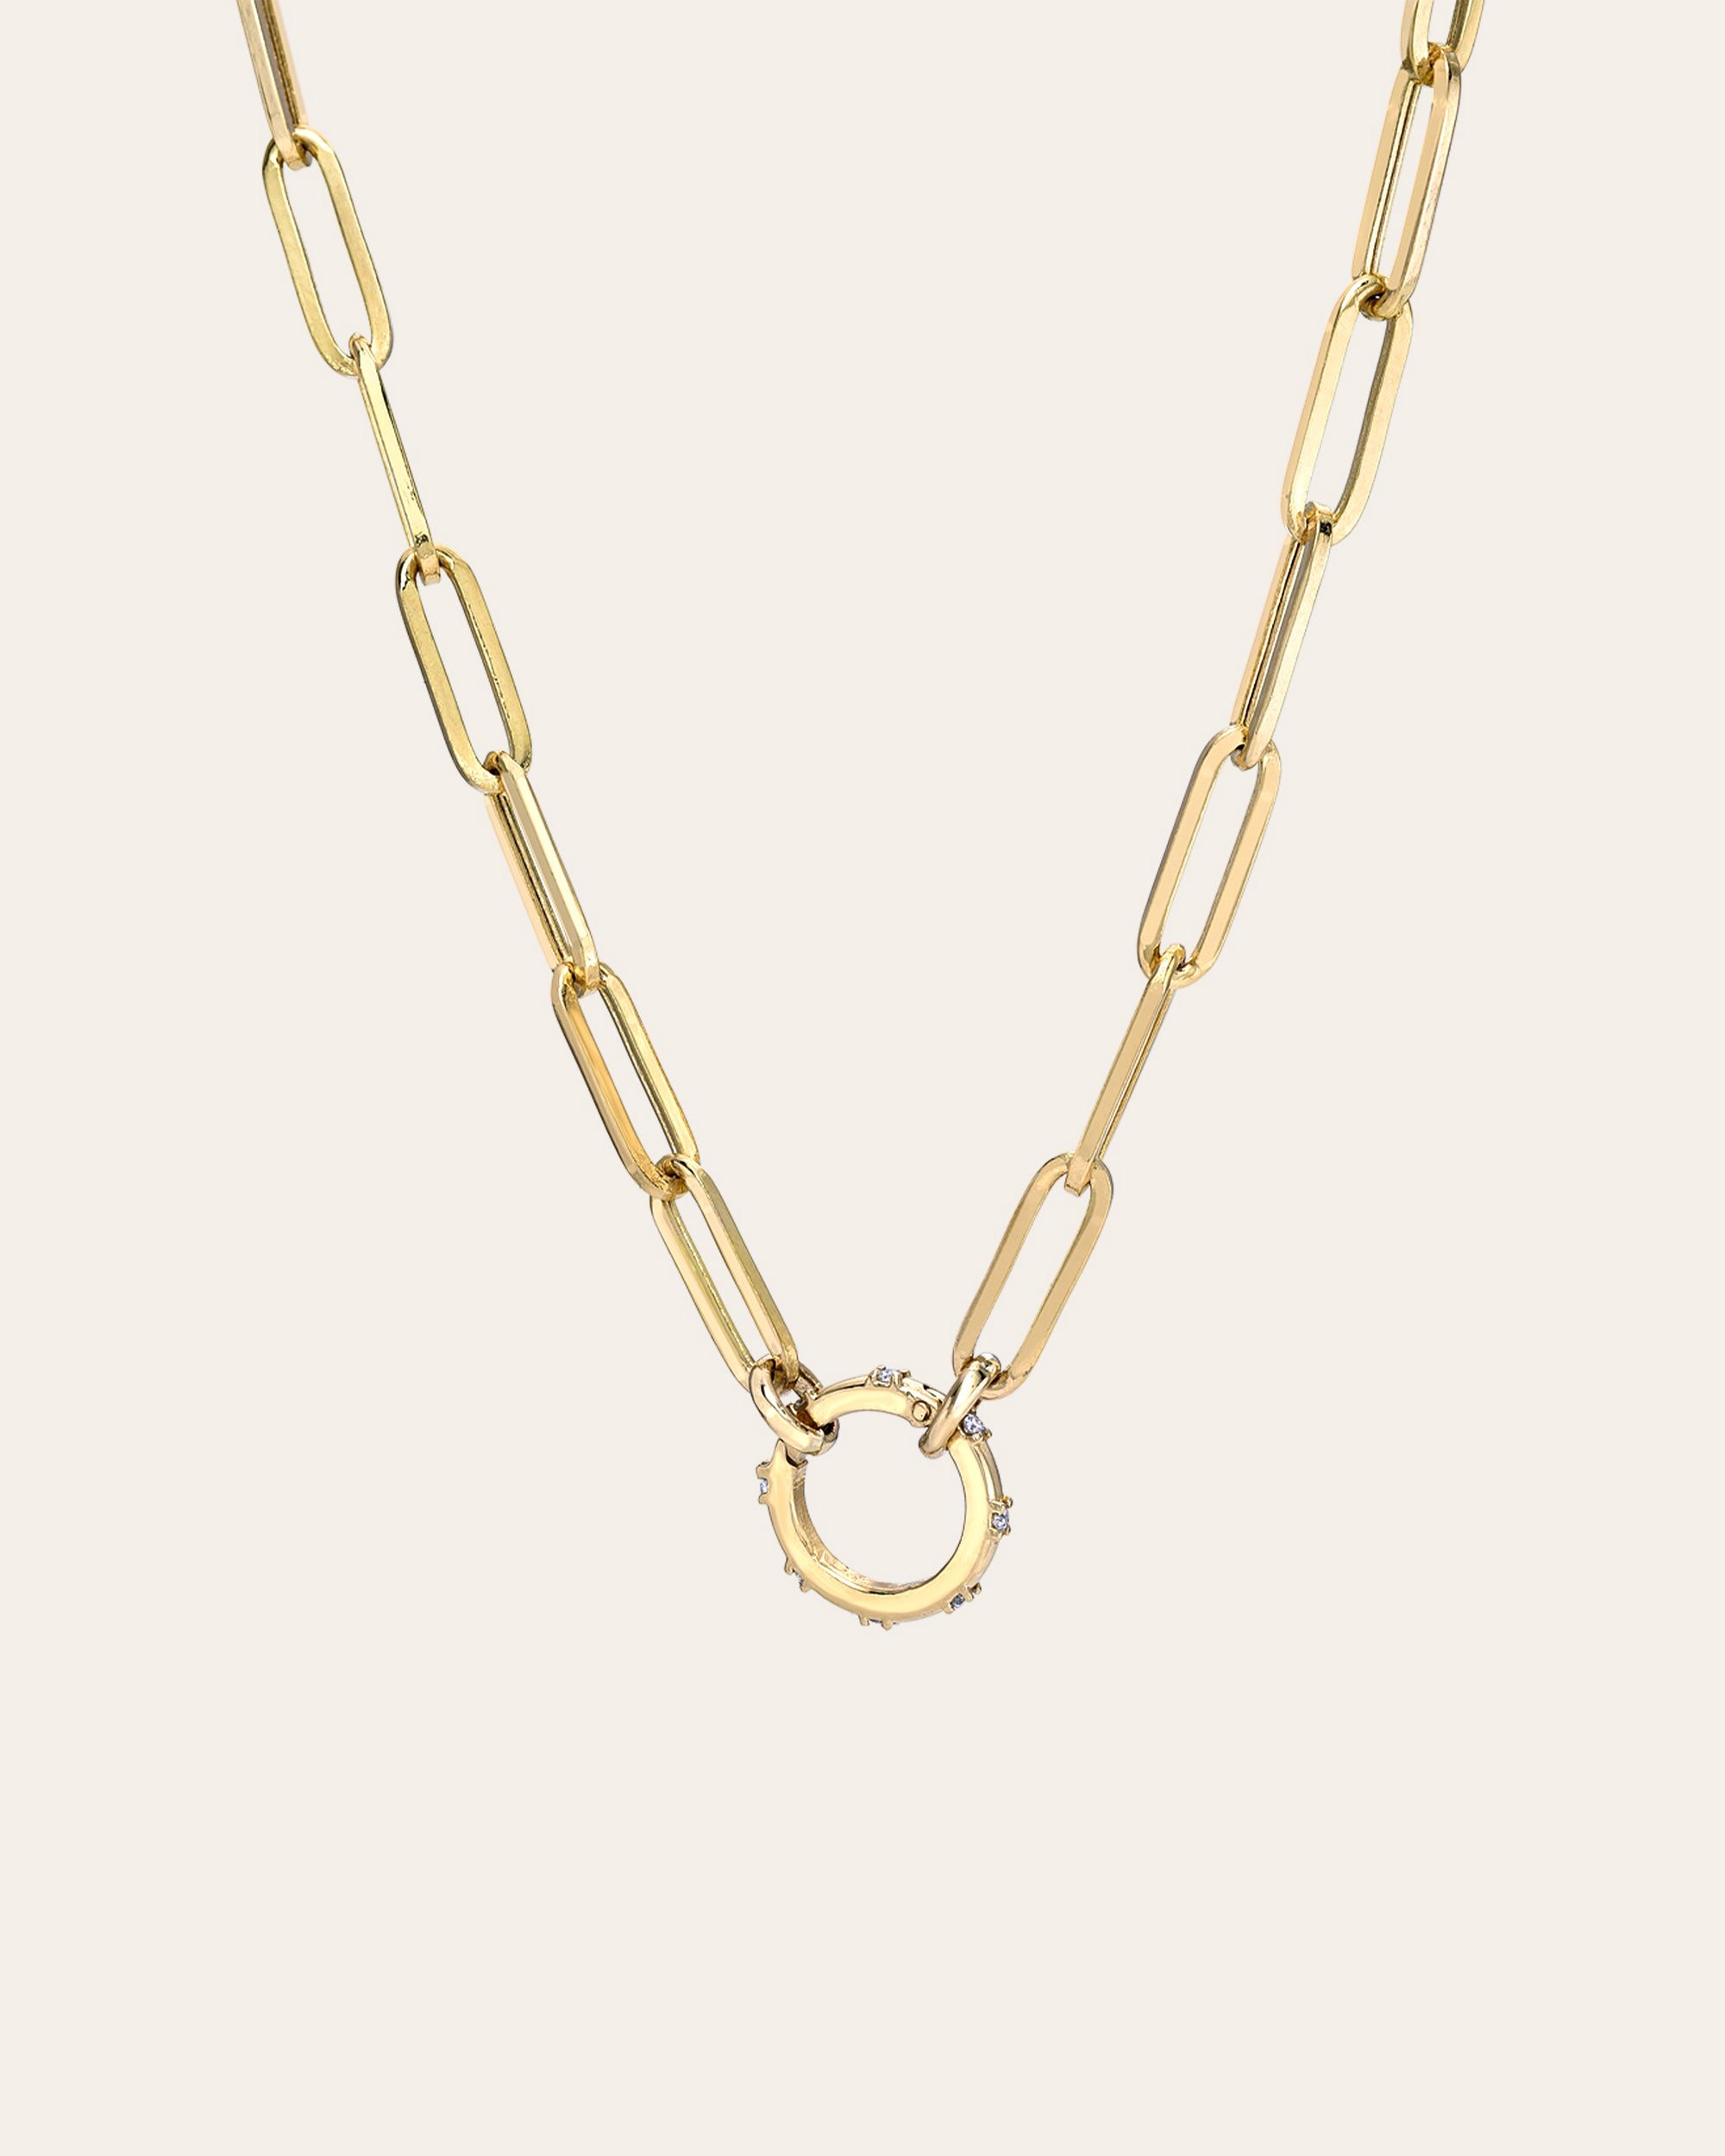 14K Solid Yellow Gold Paper Clip Finish Necklace w/ Star Carabiner Clasp,  6x18.5 mm, (14k-2.8x8(13))